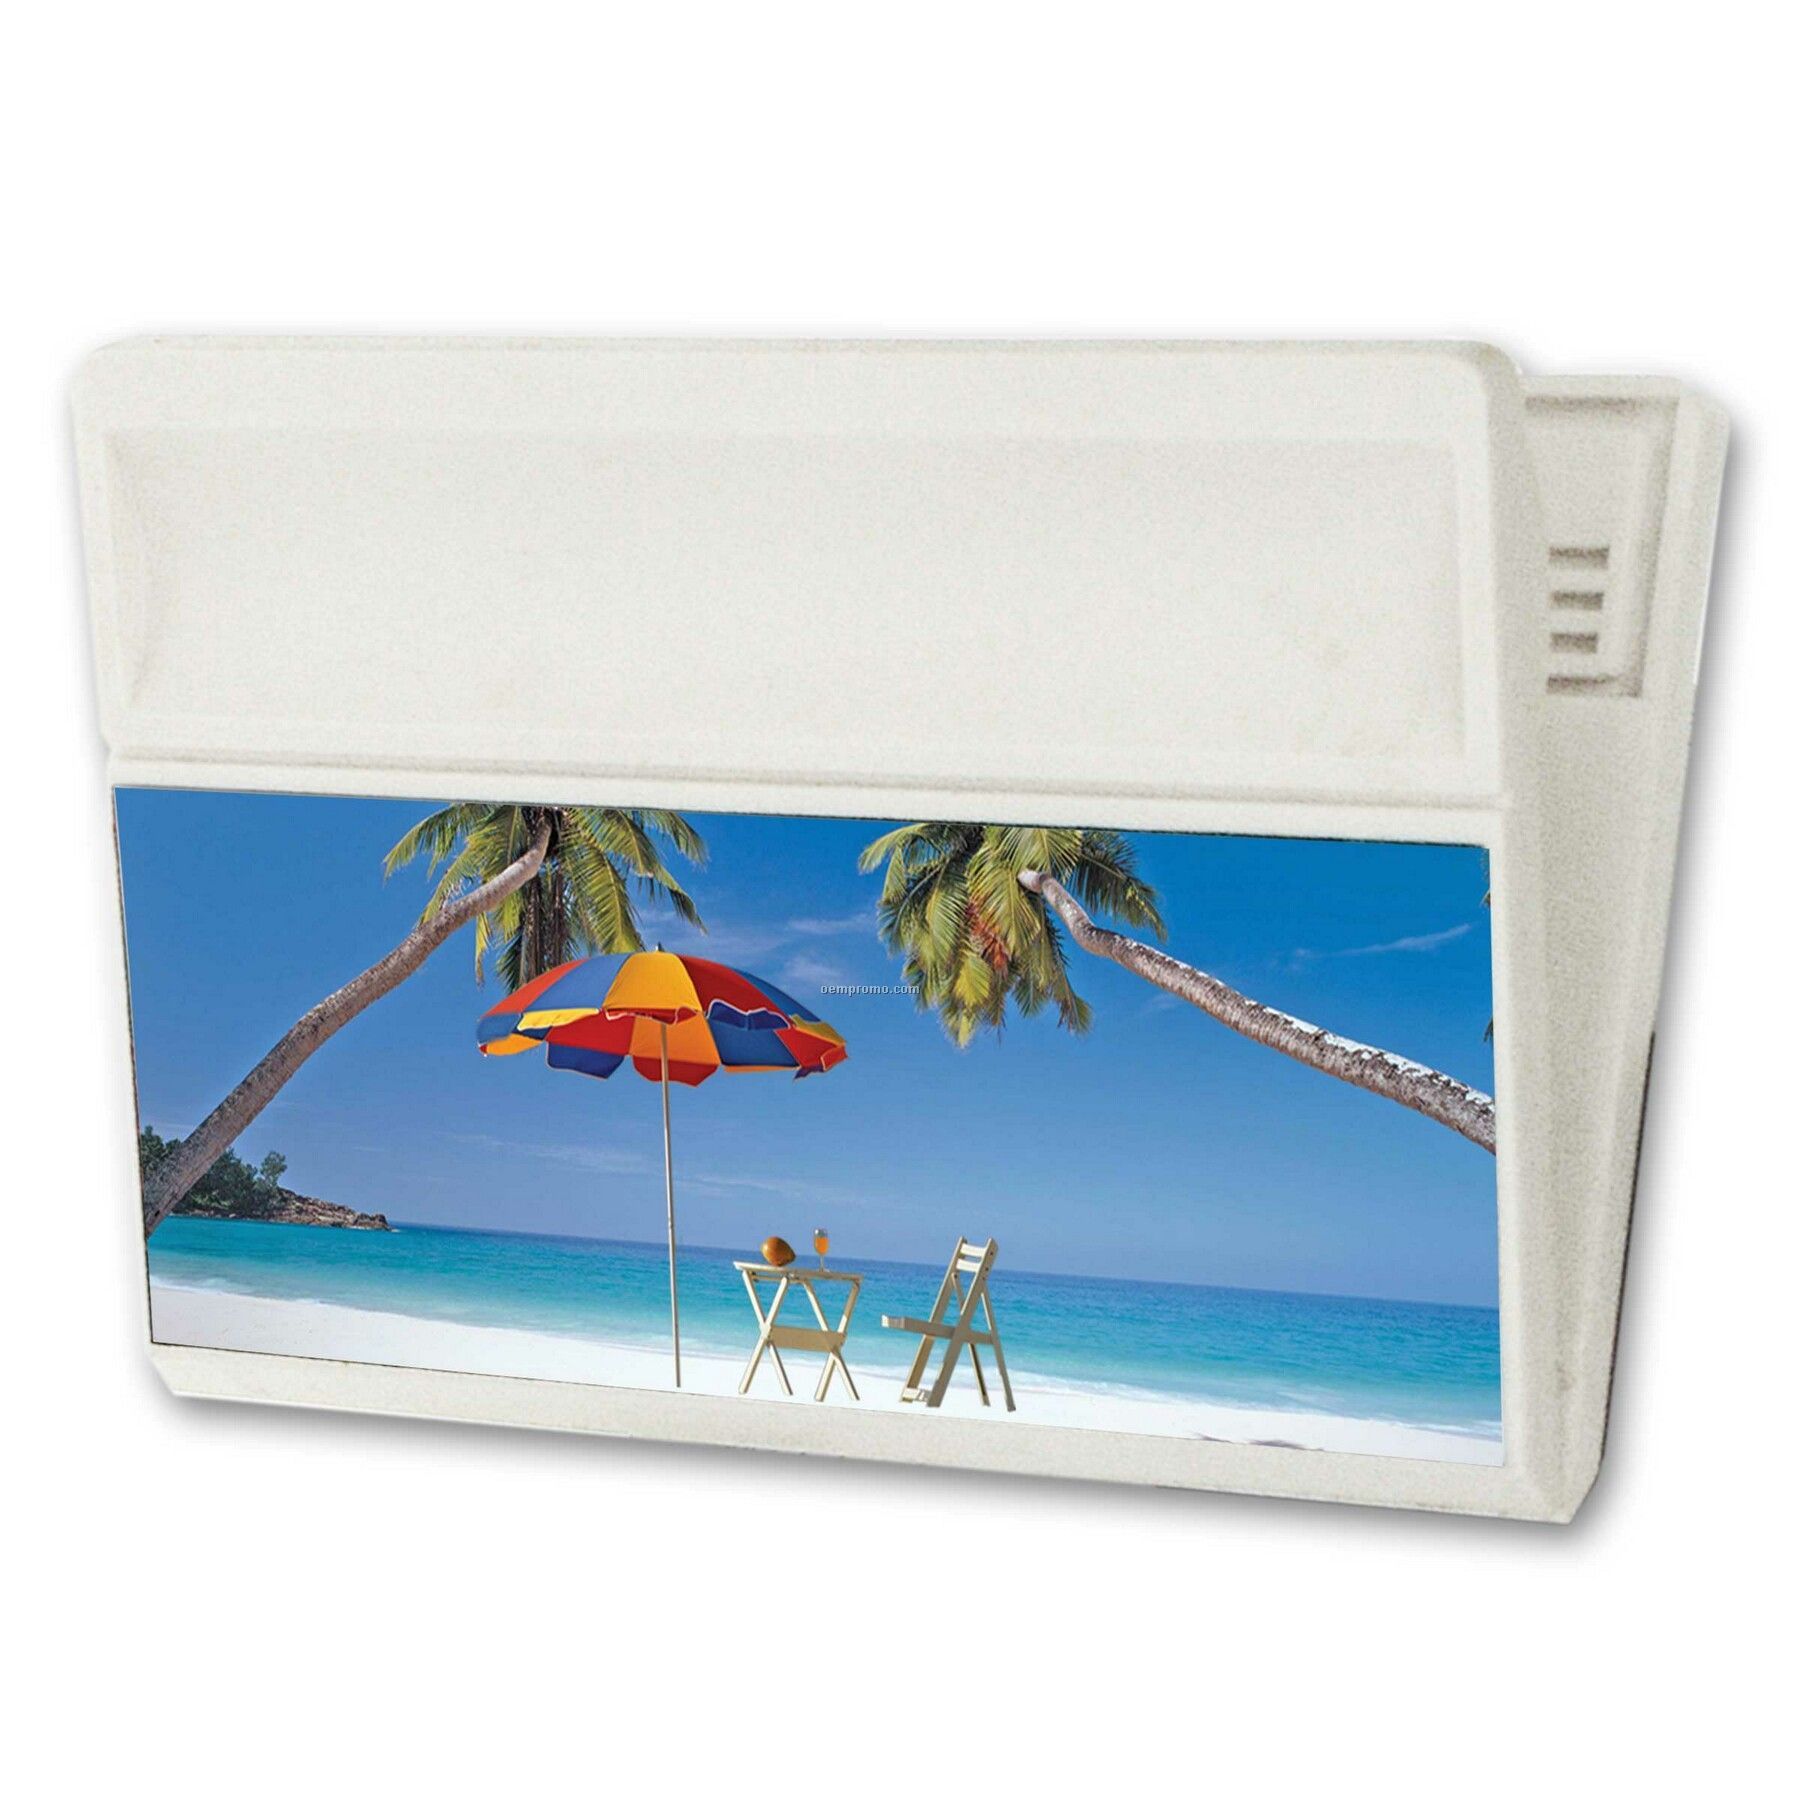 Large Magnetic Clip W/3d Lenticular Image Of A Tropical Beach (Blanks)